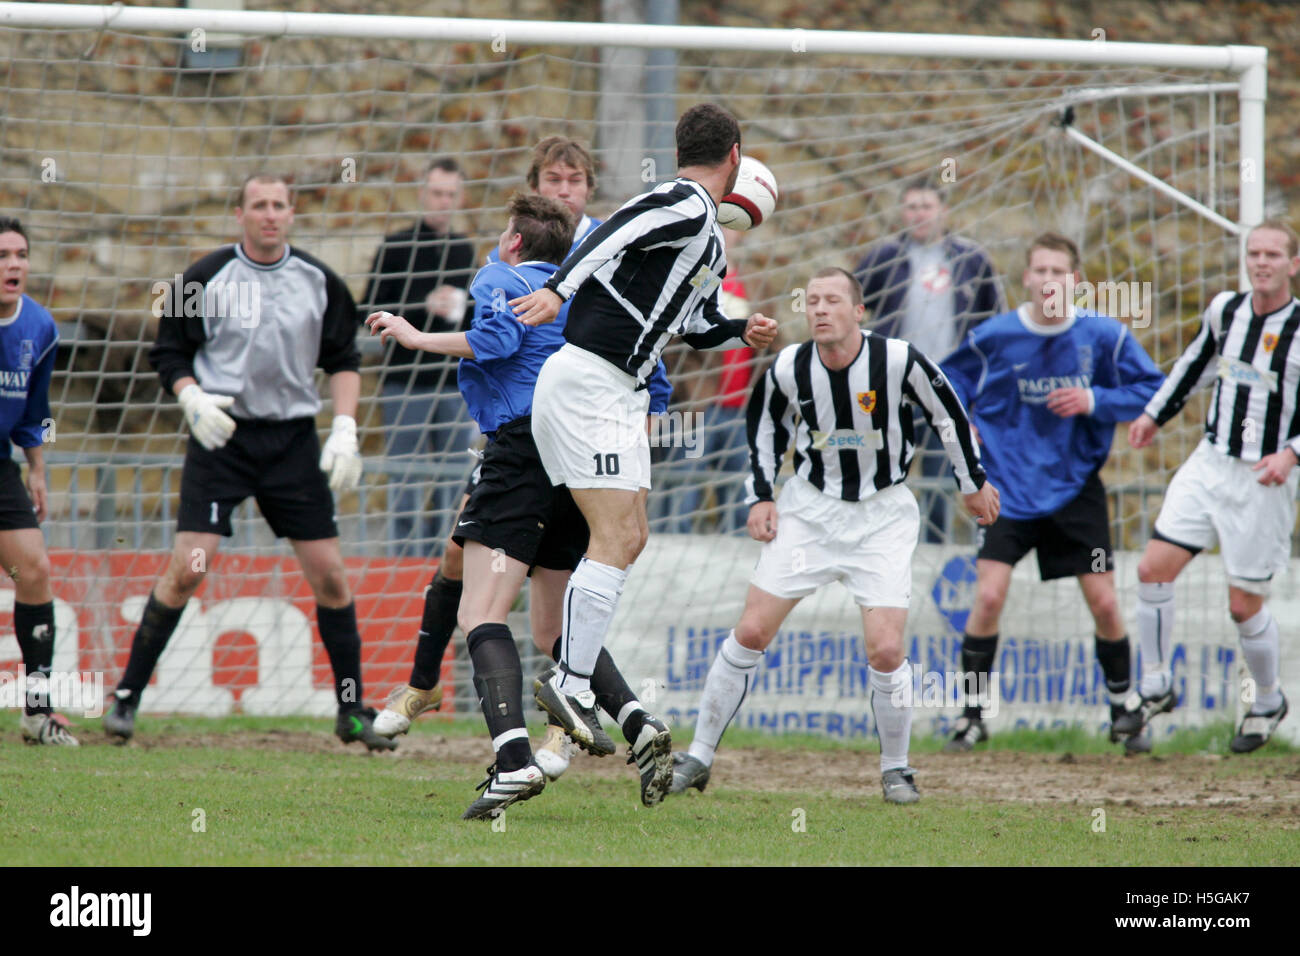 Fisher Athletic vs East Thurrock United - Ryman League at Dulwich Hamlet FC - 16/04/05 Stock Photo